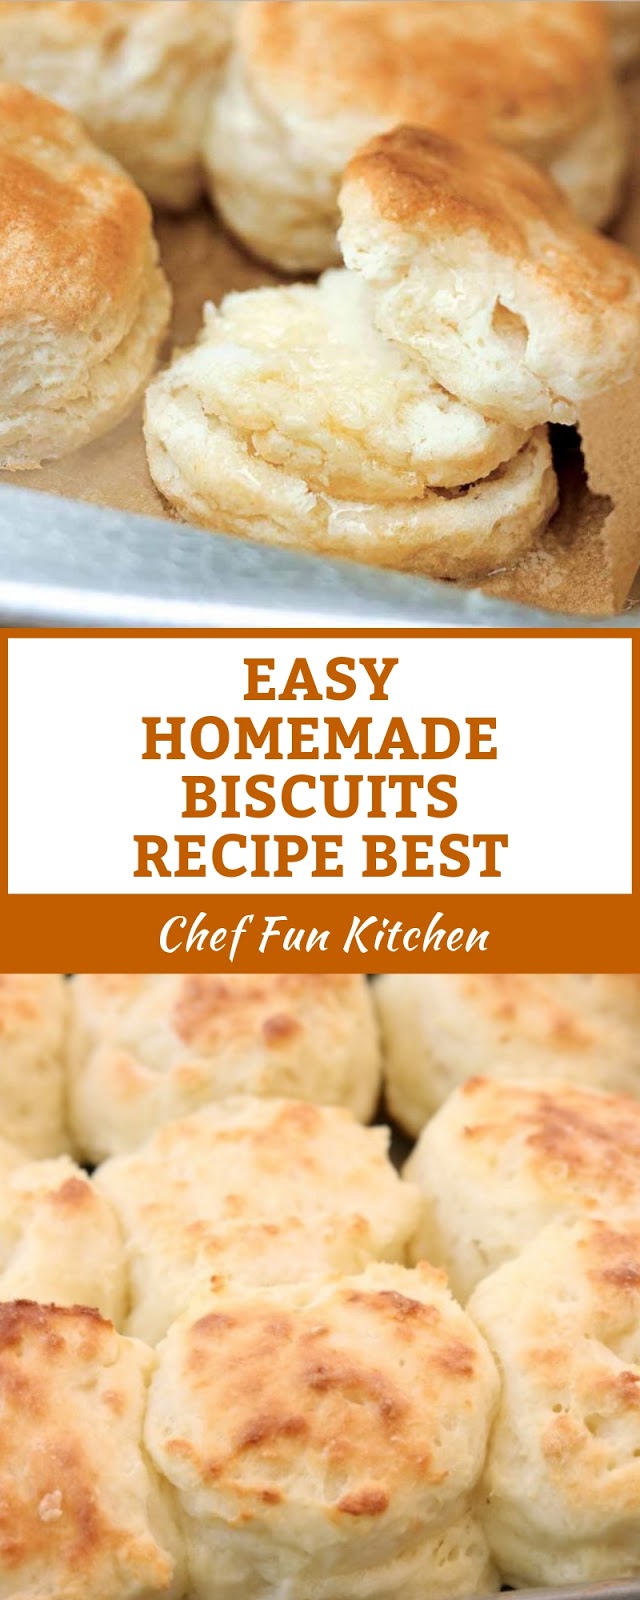 EASY HOMEMADE BISCUITS RECIPE BEST